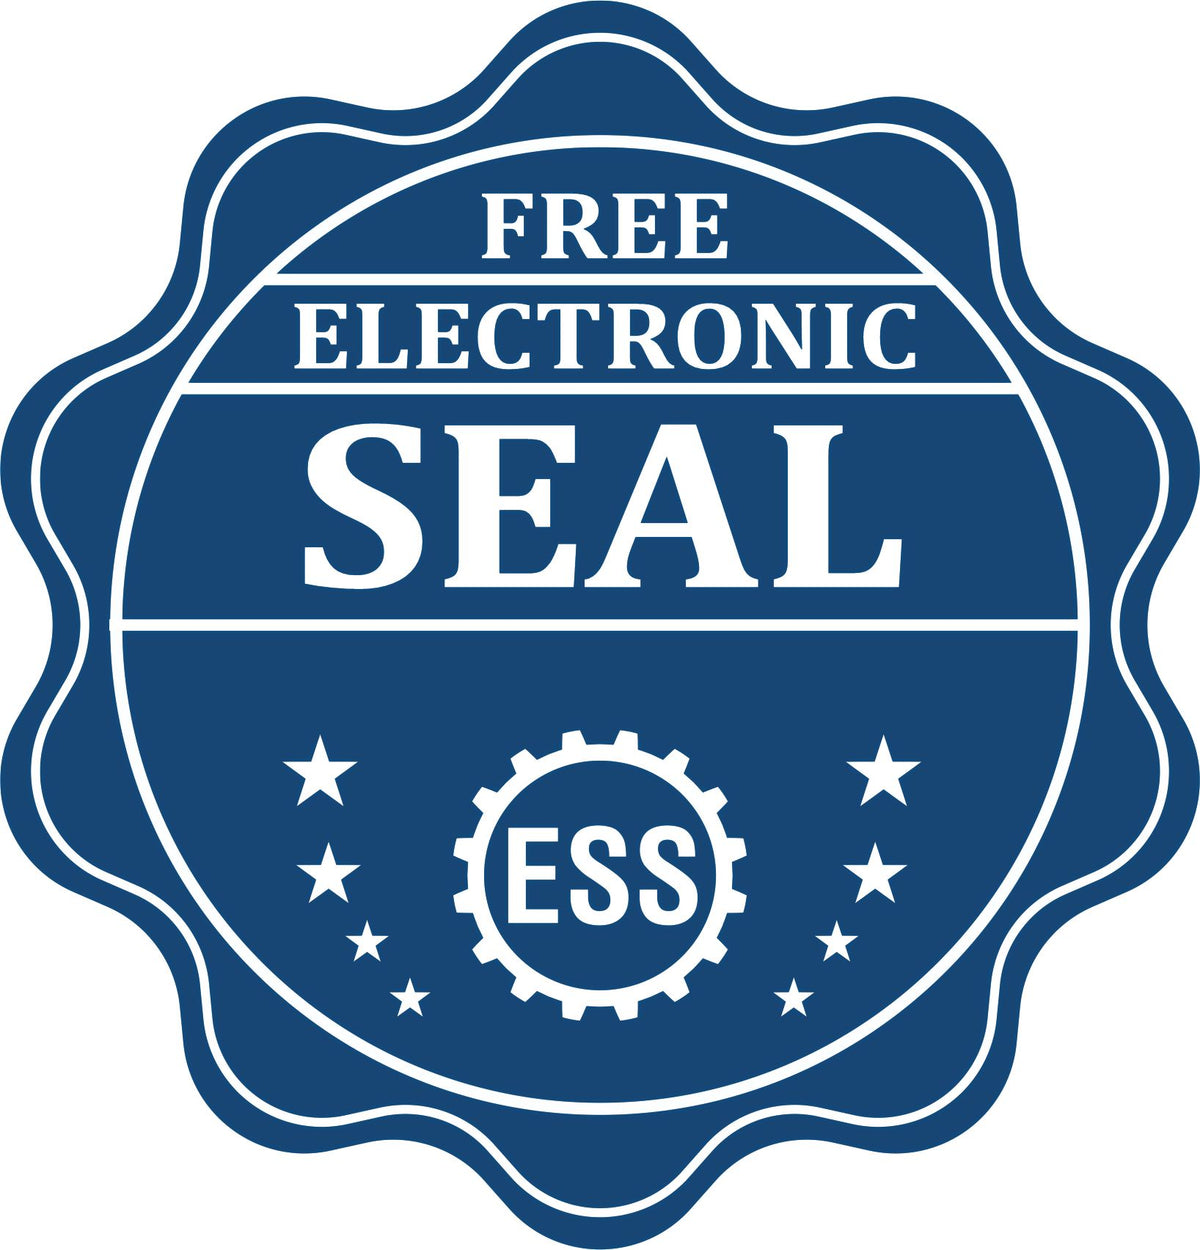 A badge showing a free electronic seal for the Hybrid Nevada Architect Seal with stars and the ESS gear on the emblem.